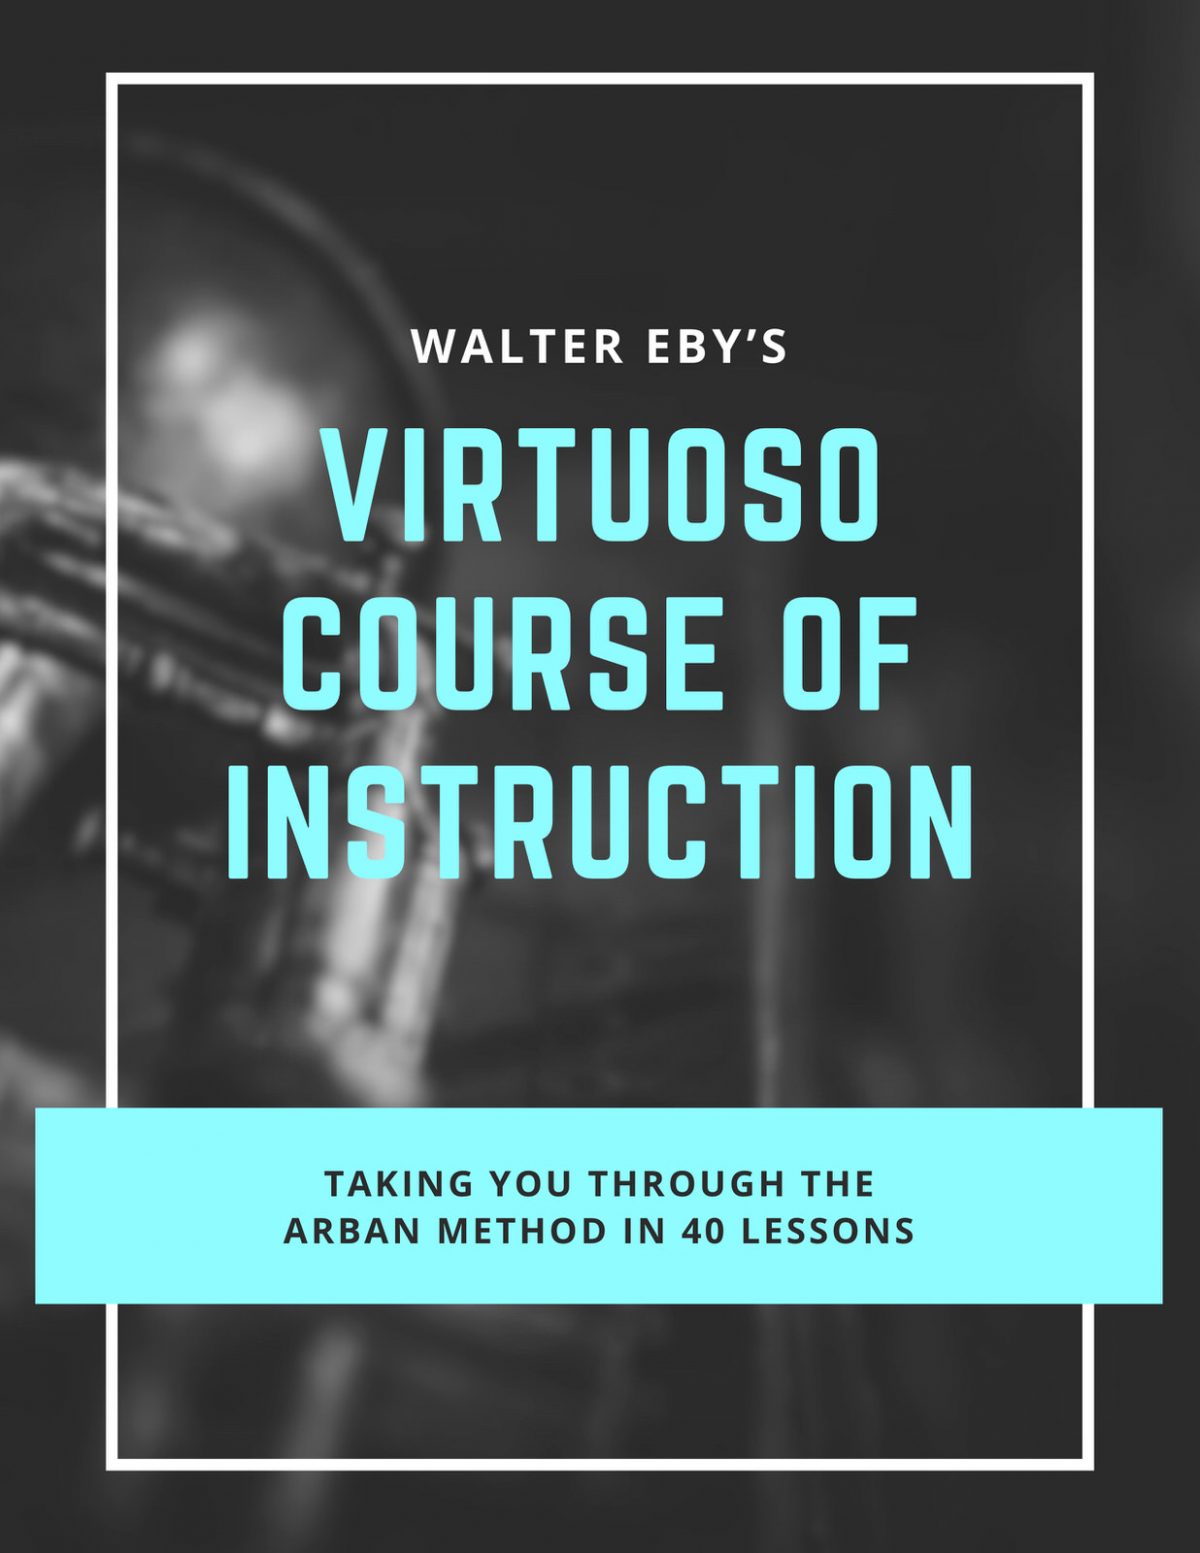 Eby, Viruoso Course of Instruction